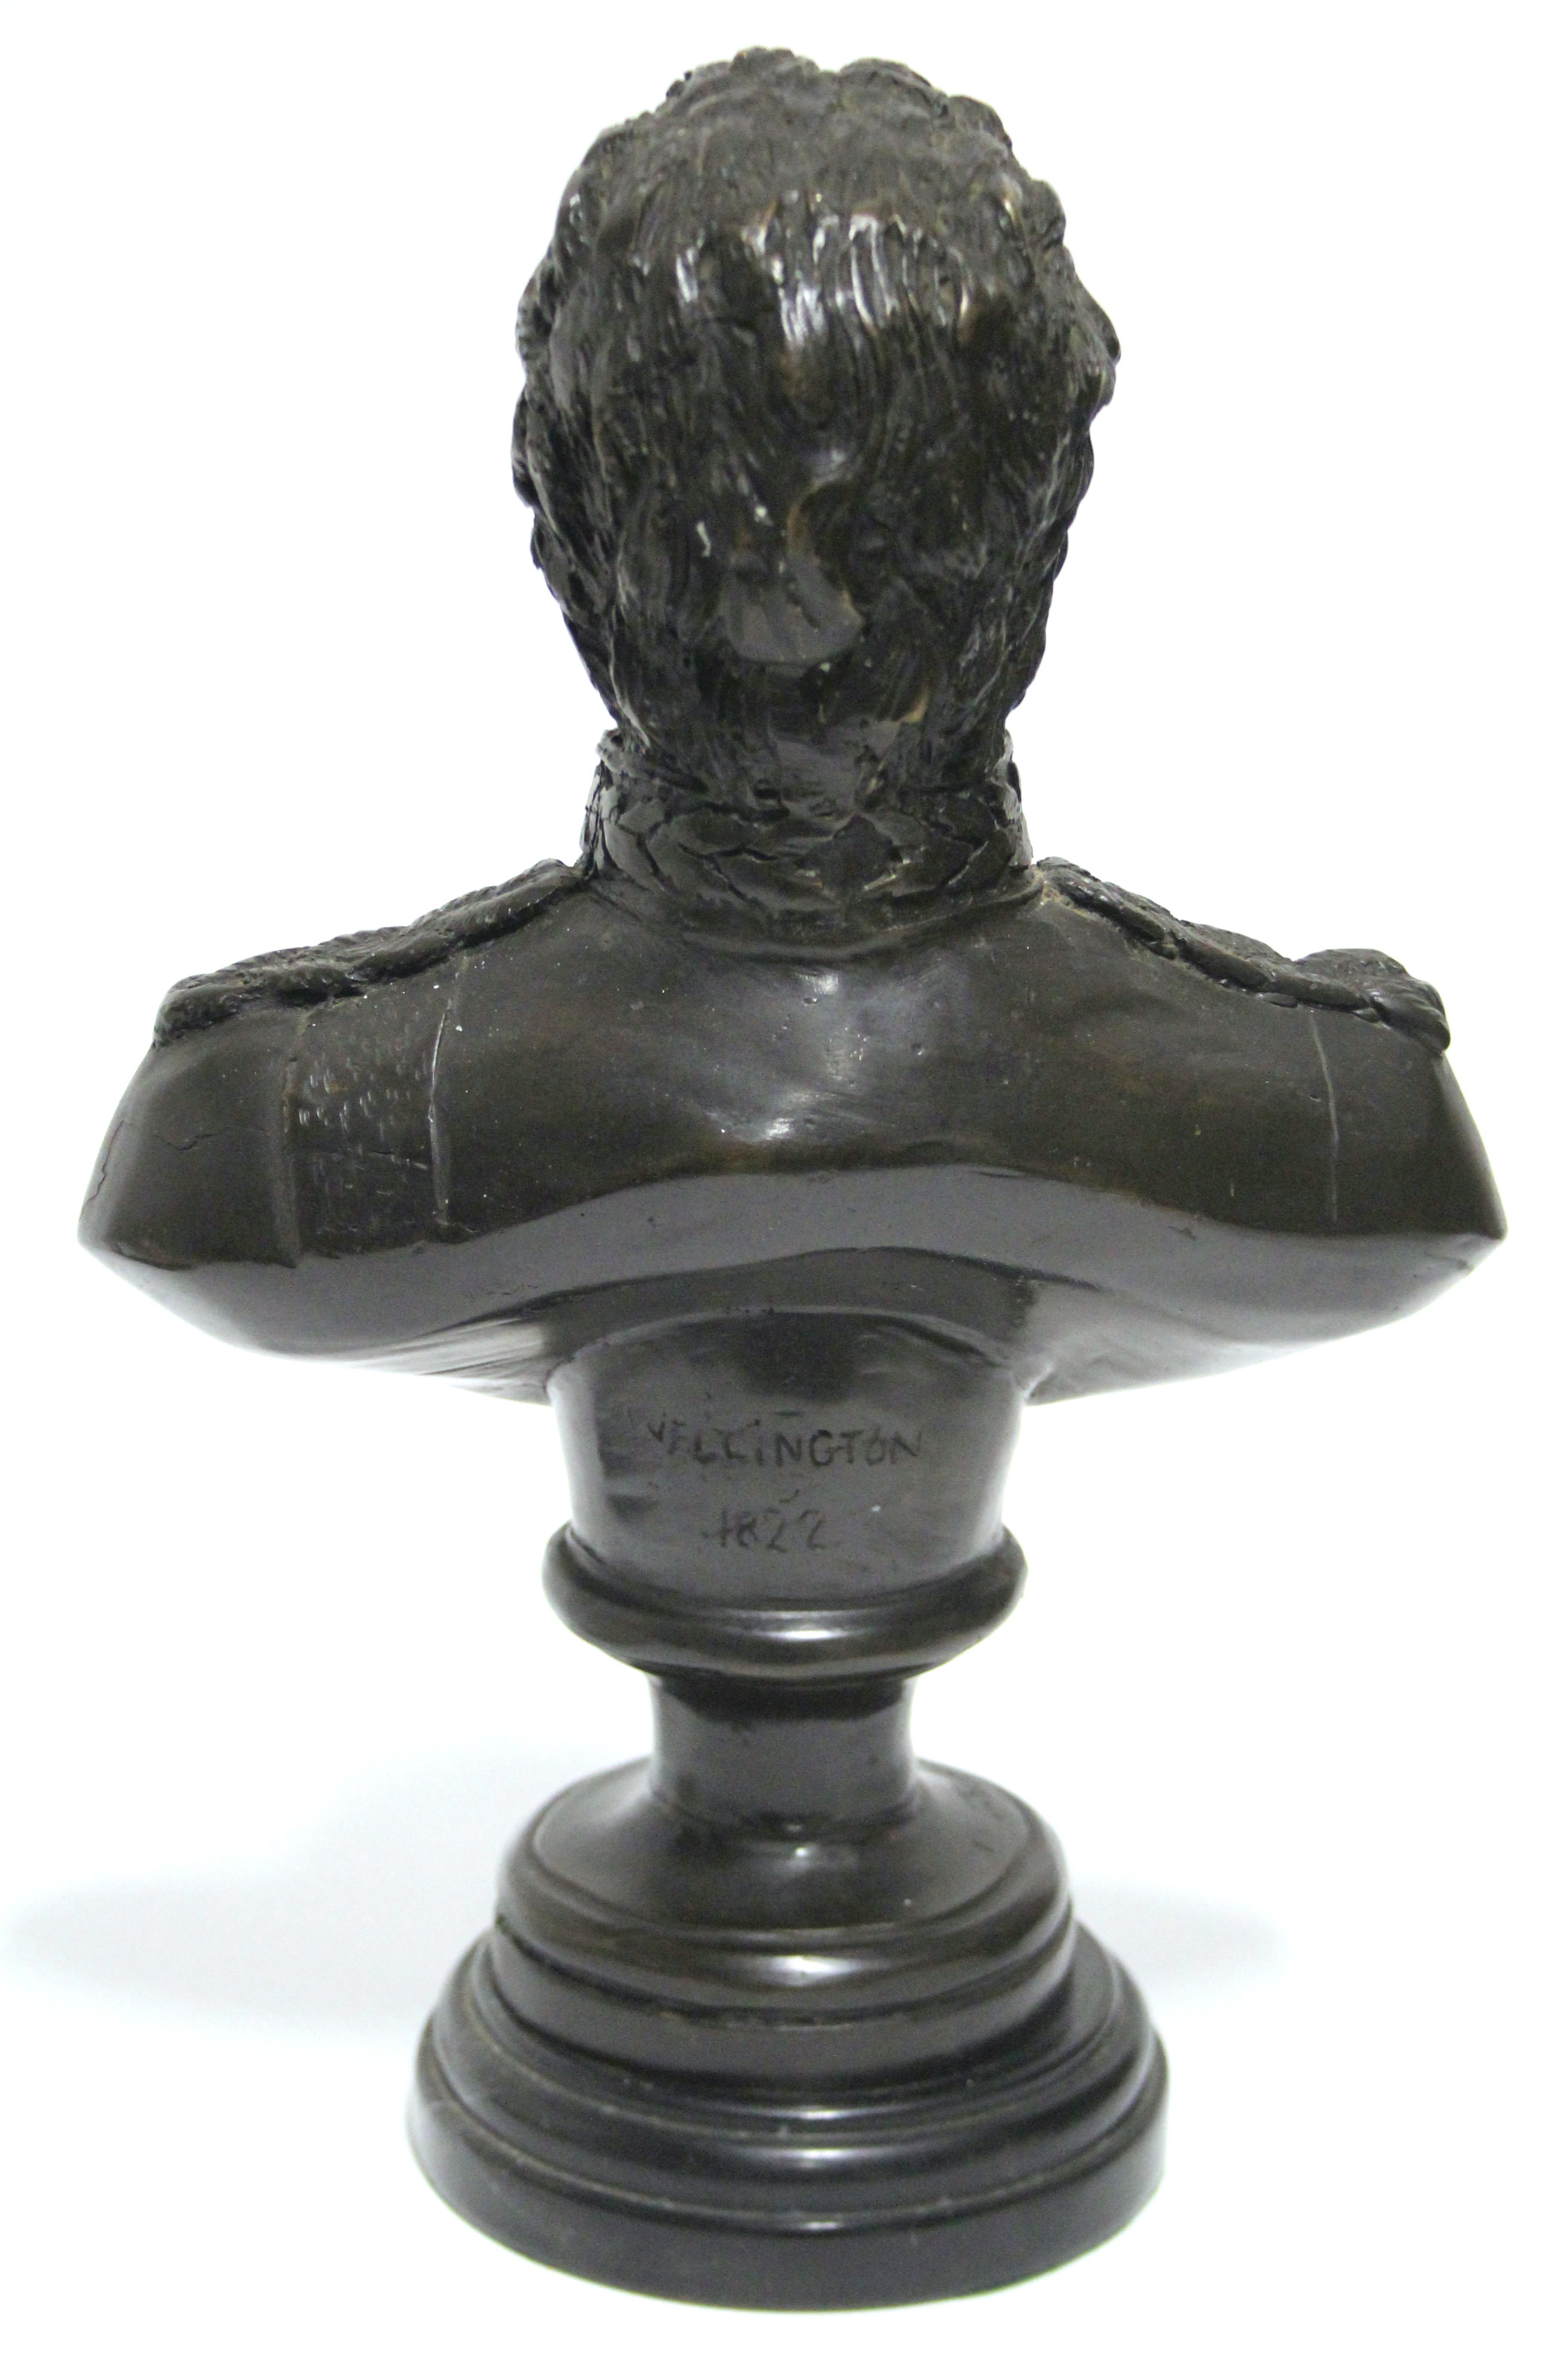 A bronze bust of the Duke of Wellington, on round black marble socle; 14” high over-all. - Image 2 of 3